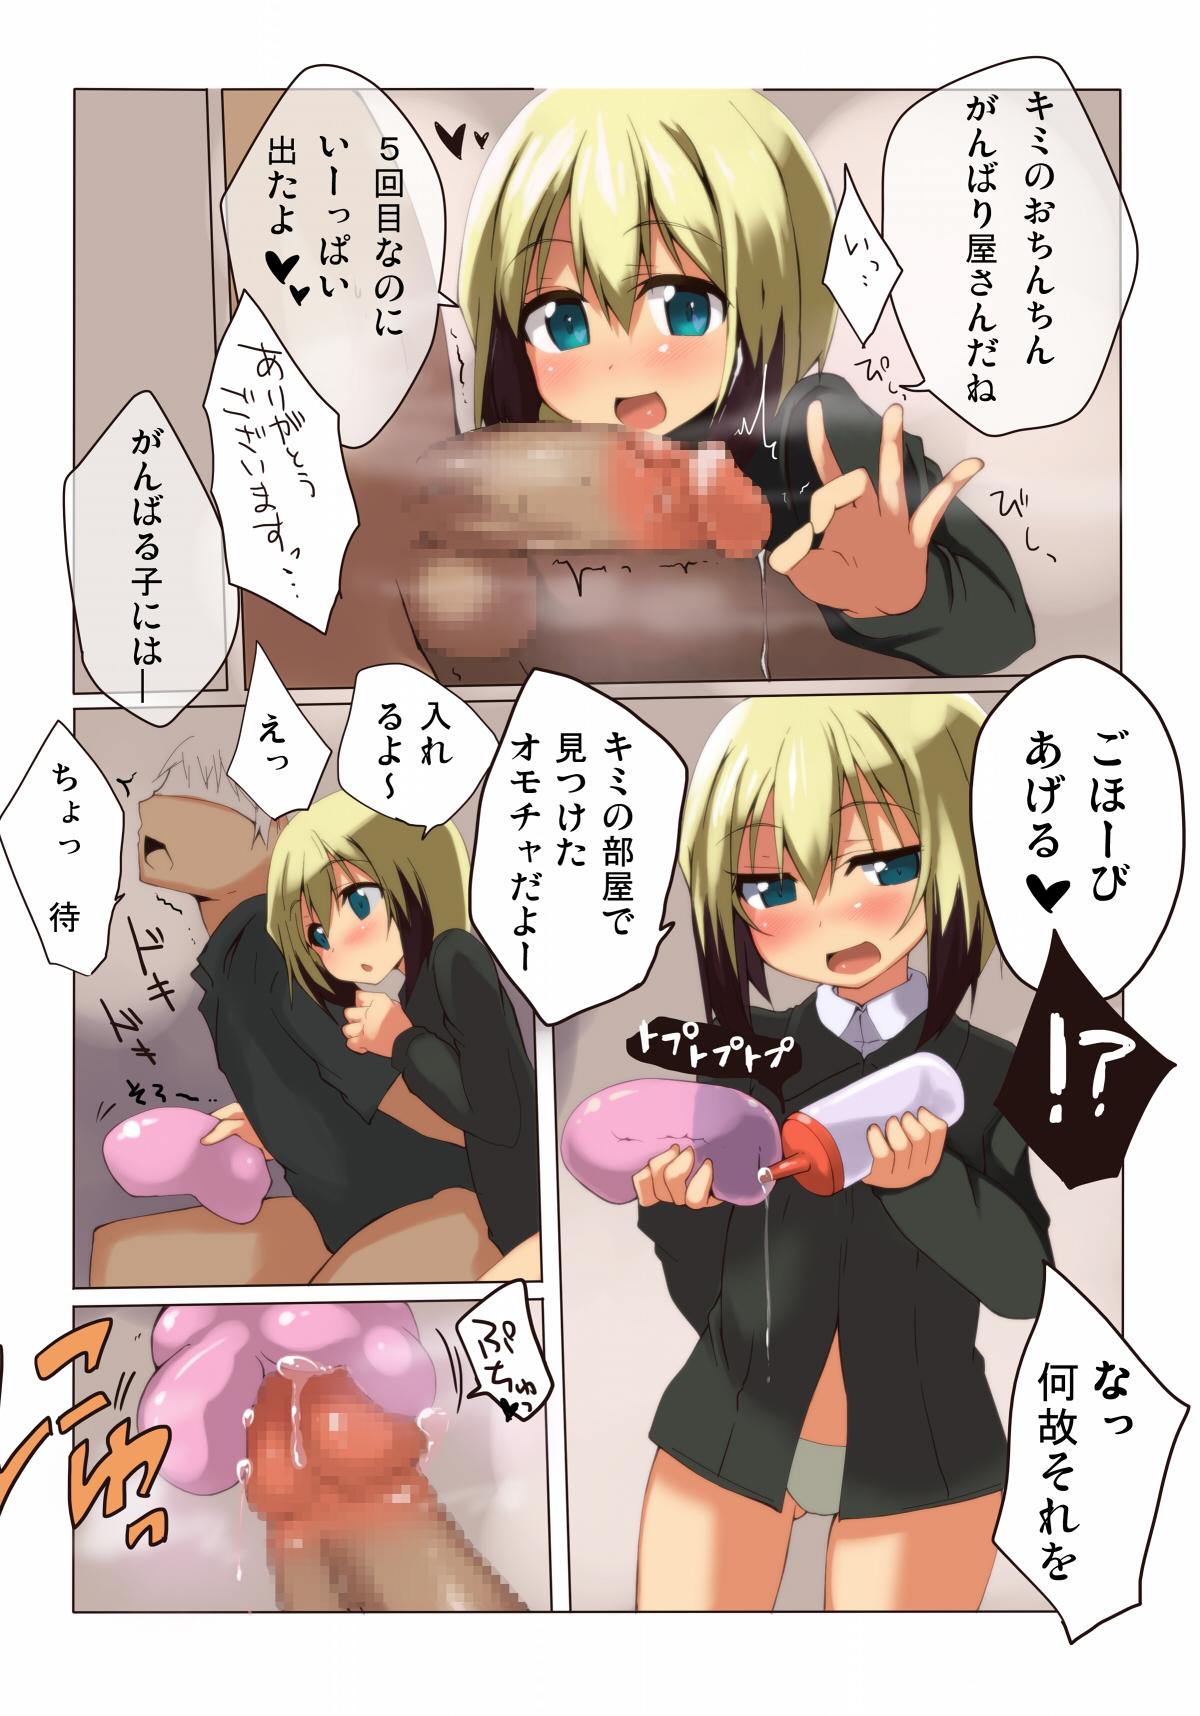 Best Blowjobs Ever HARTMAAAAN!!!! - Strike witches Sextoys - Page 4